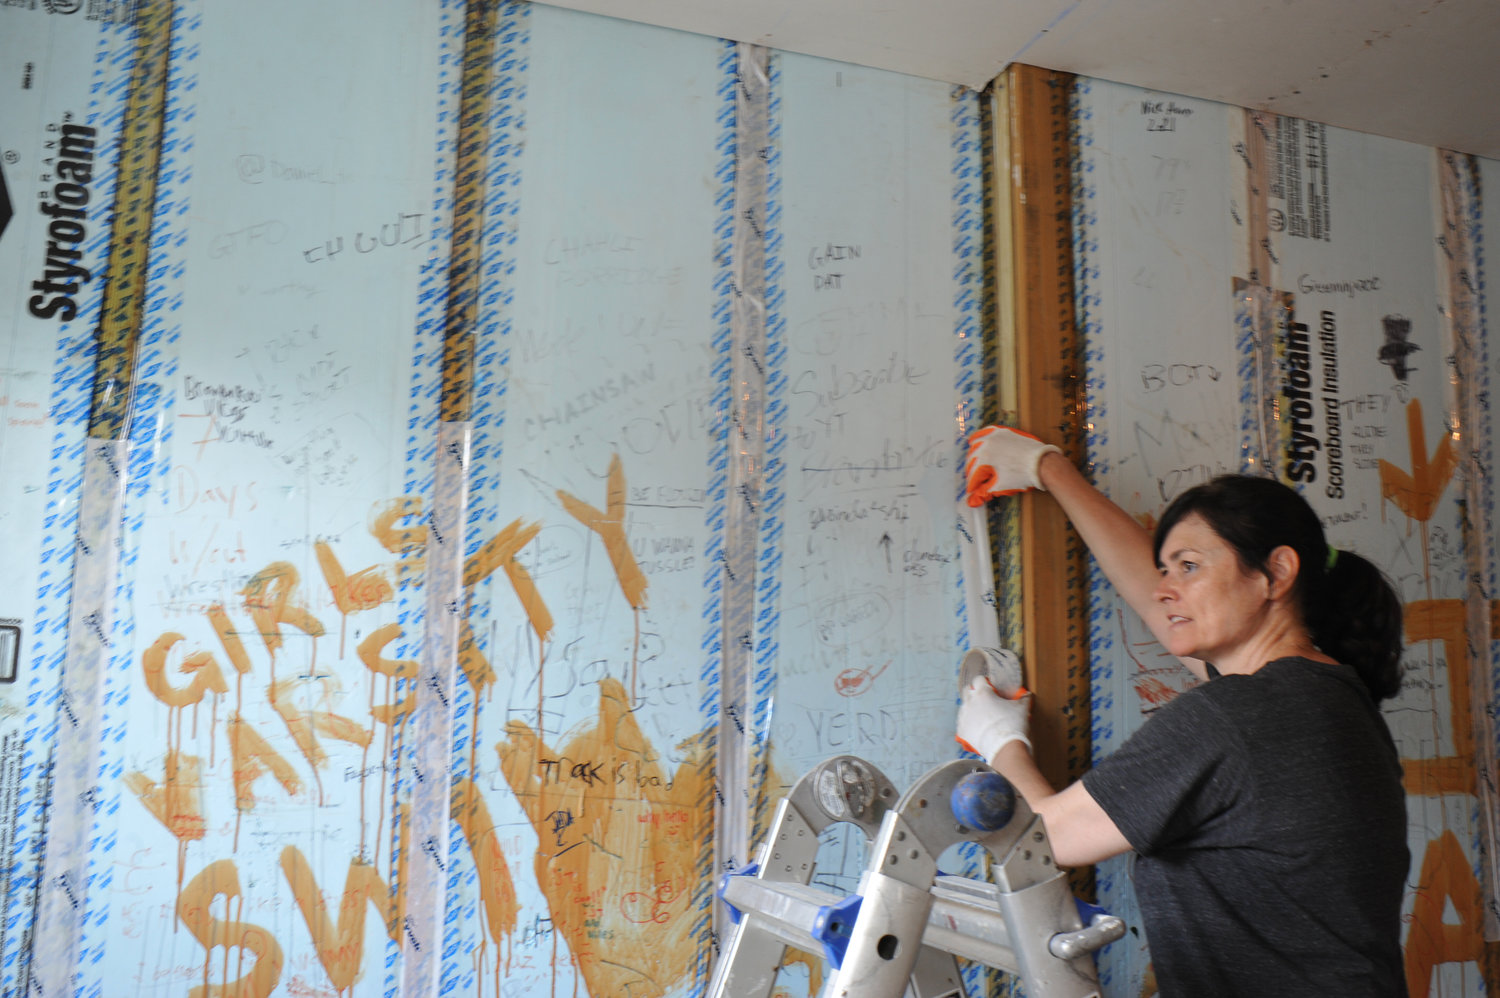 Holy Child’s engineering director Kristine Budill works on an interior wall.